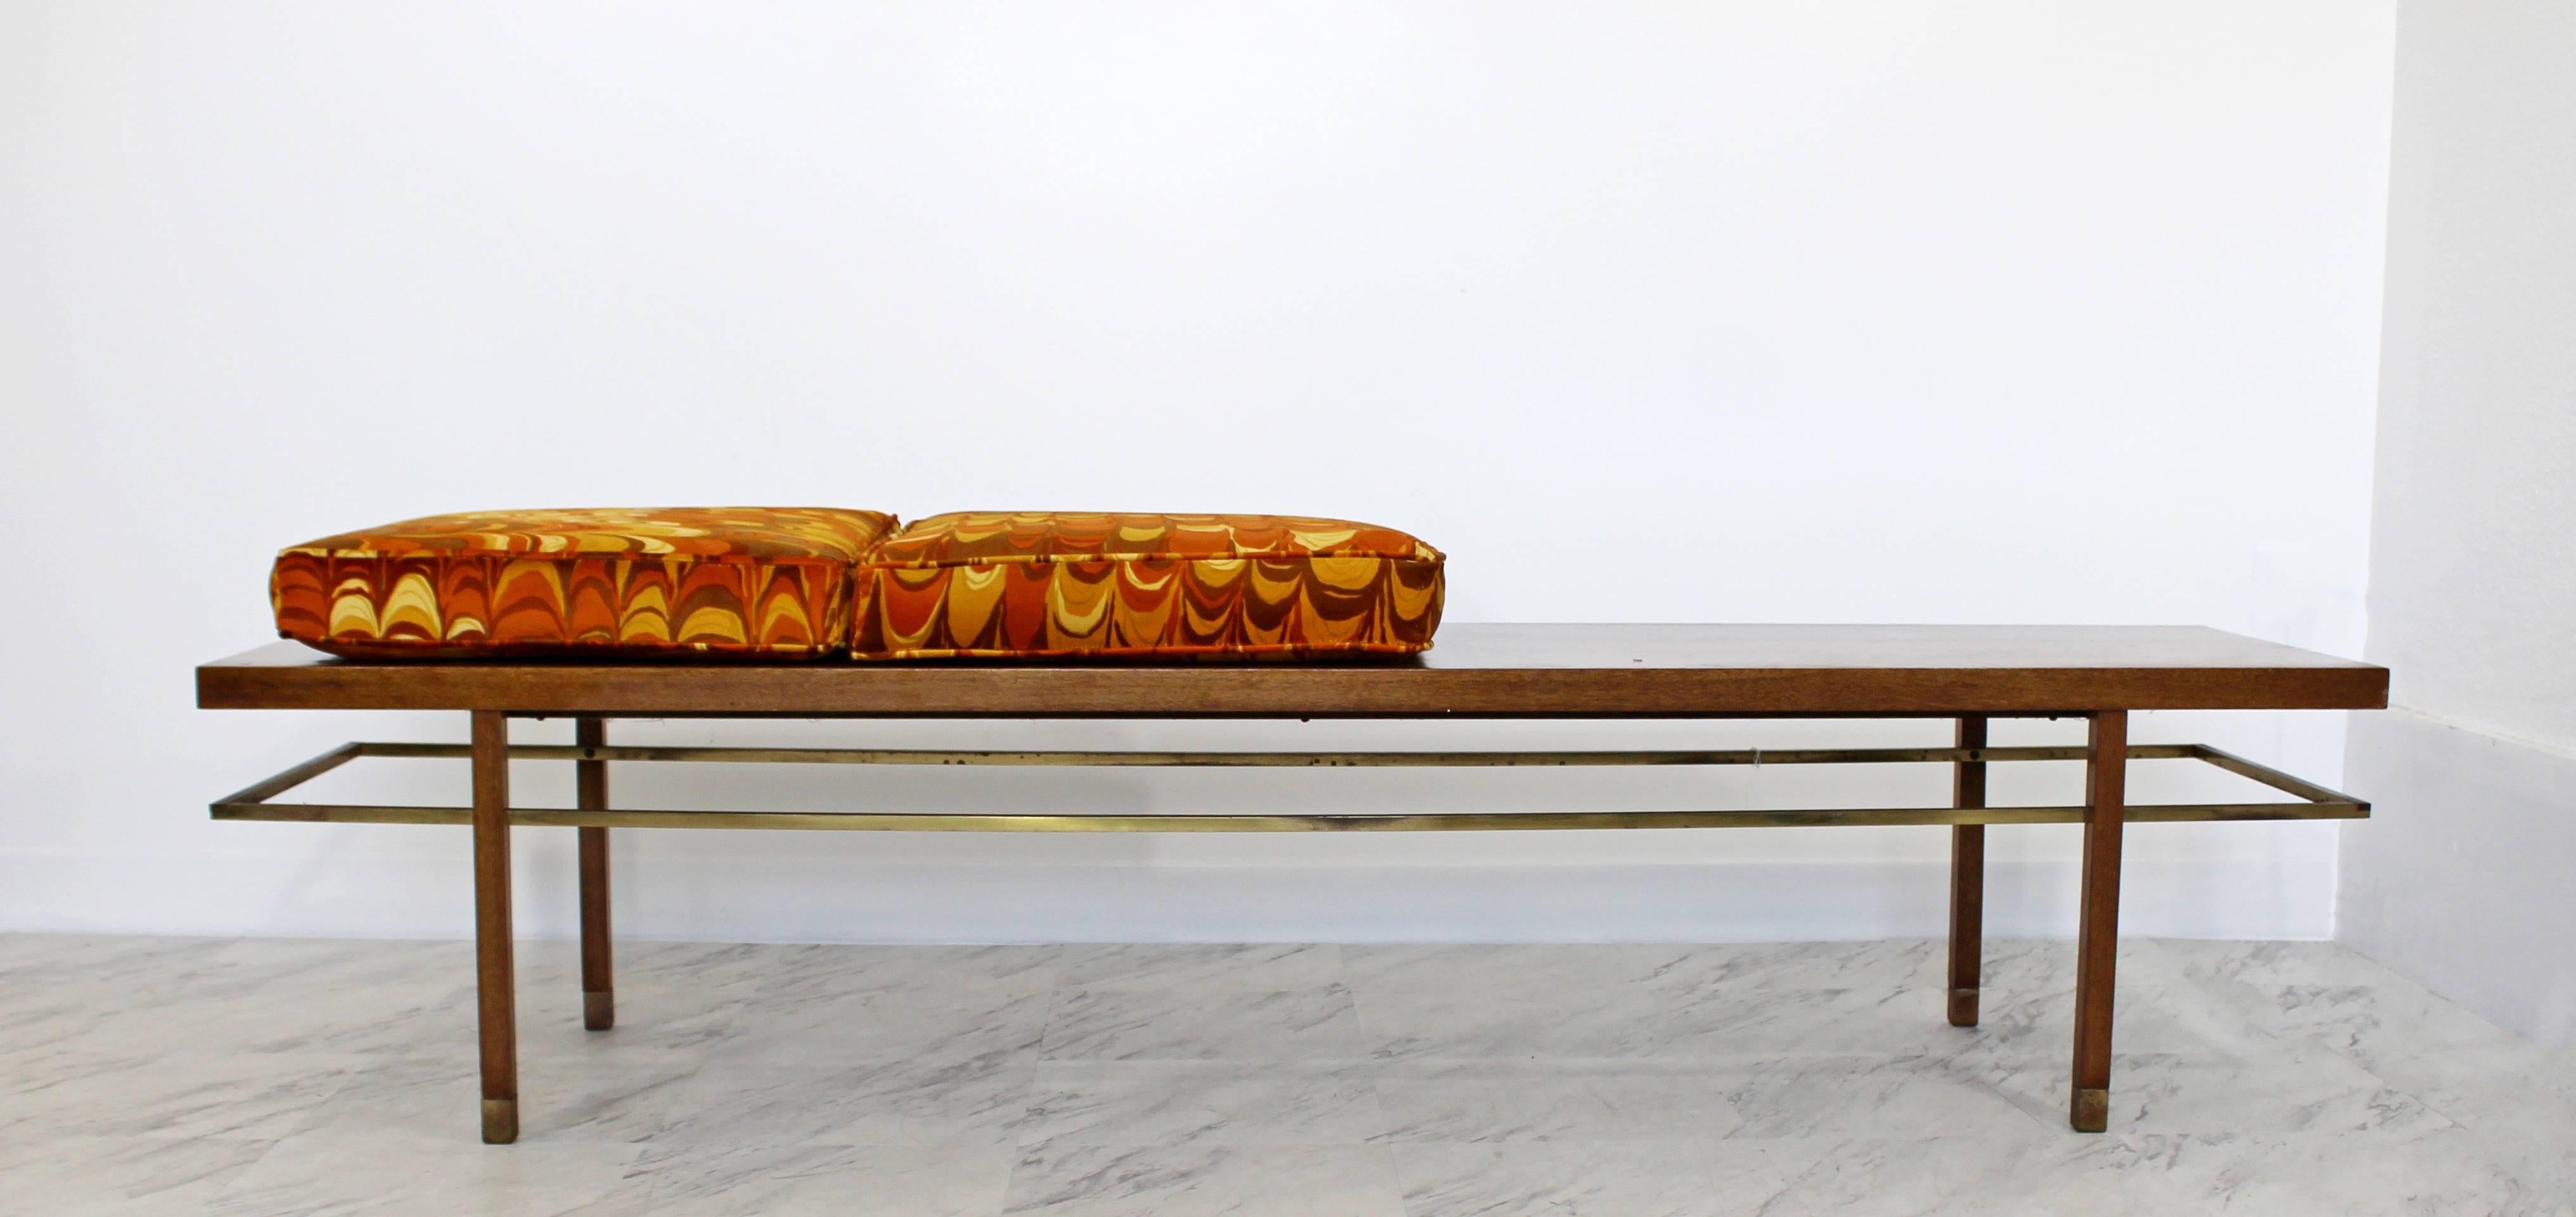 For your consideration is a phenomenal brass frame bench by Harvey Probber, walnut with brass stretchers, circa the 1960s. Cushions were recently redone in Jack Lenor Larsen fabric. The dimensions are 70.5